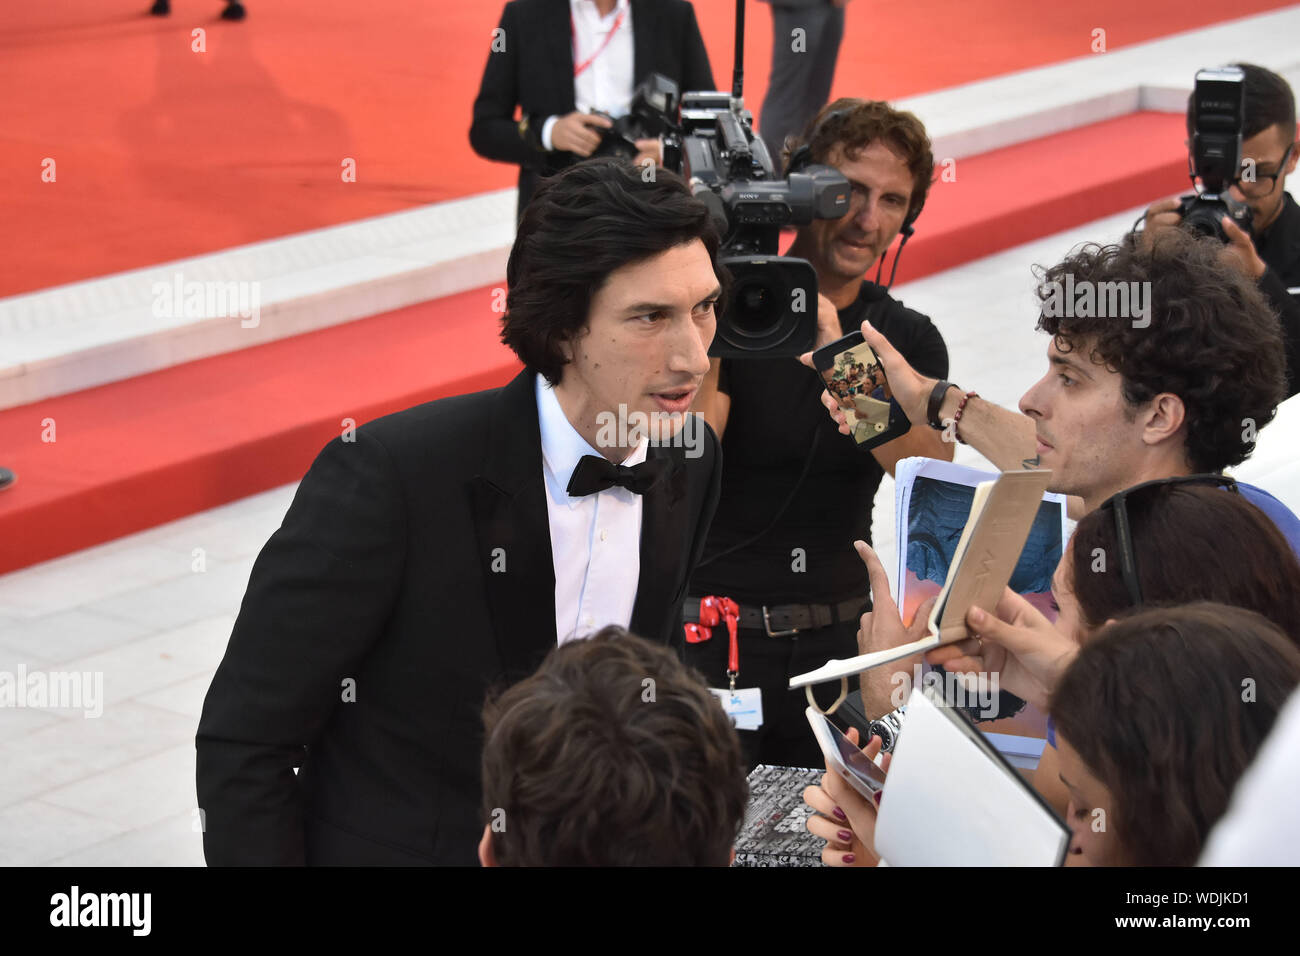 VENICE, Italy. 29th Aug, 2019. Adam Driver walks the red carpet ahead of the 'Marriage Story' screening during the 76th Venice Film Festival at Sala Grande on August 29, 2019 in Venice, Italy. Credit: Andrea Merola/Awakening/Alamy Live News Stock Photo